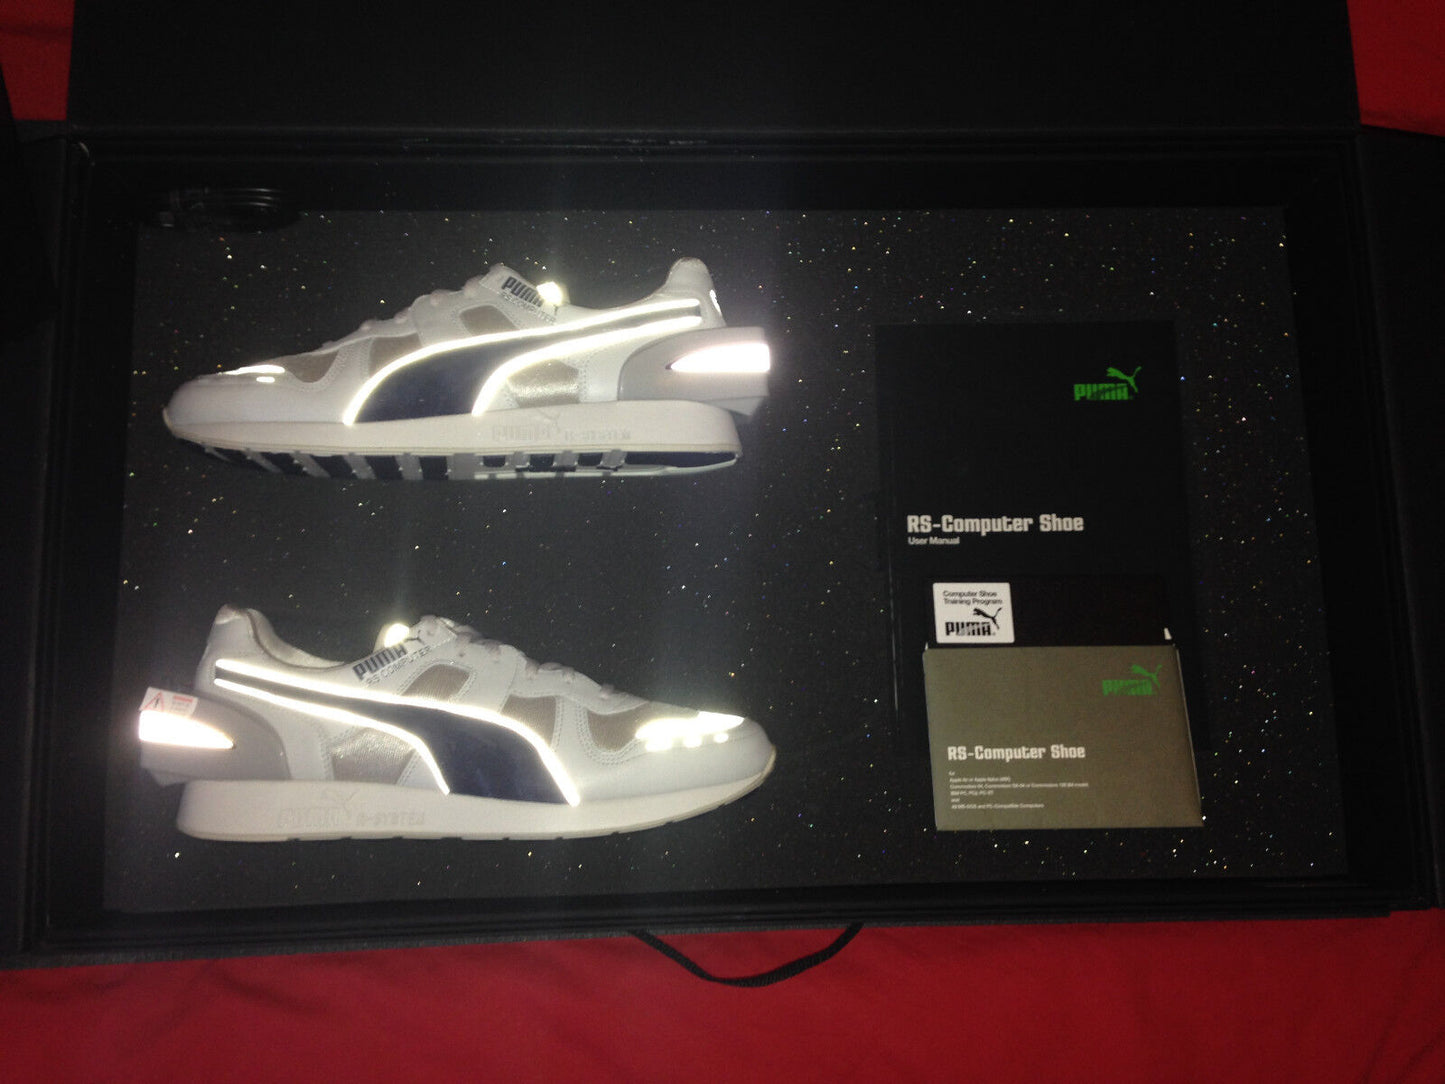 Puma RS Computer Shoe 1986-2018 #23 of 86 pairs worldwide new US 9 UK 8 EUR 42